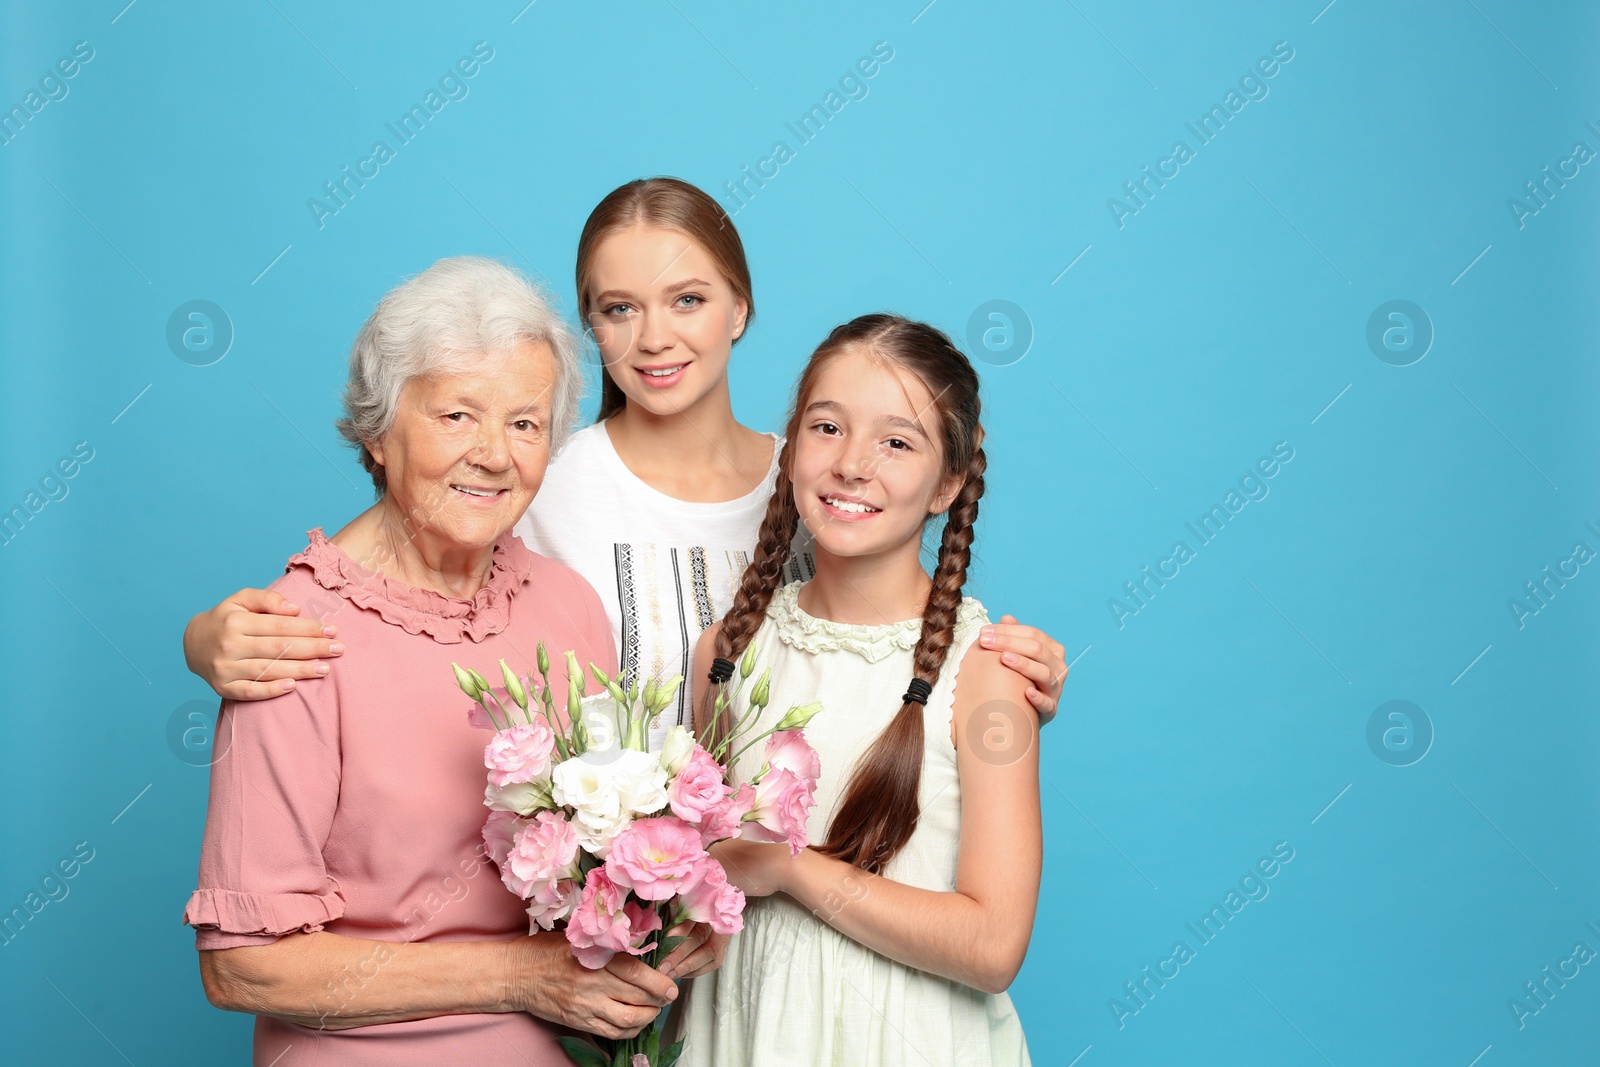 Photo of Happy sisters with their grandmother holding flowers on light blue background